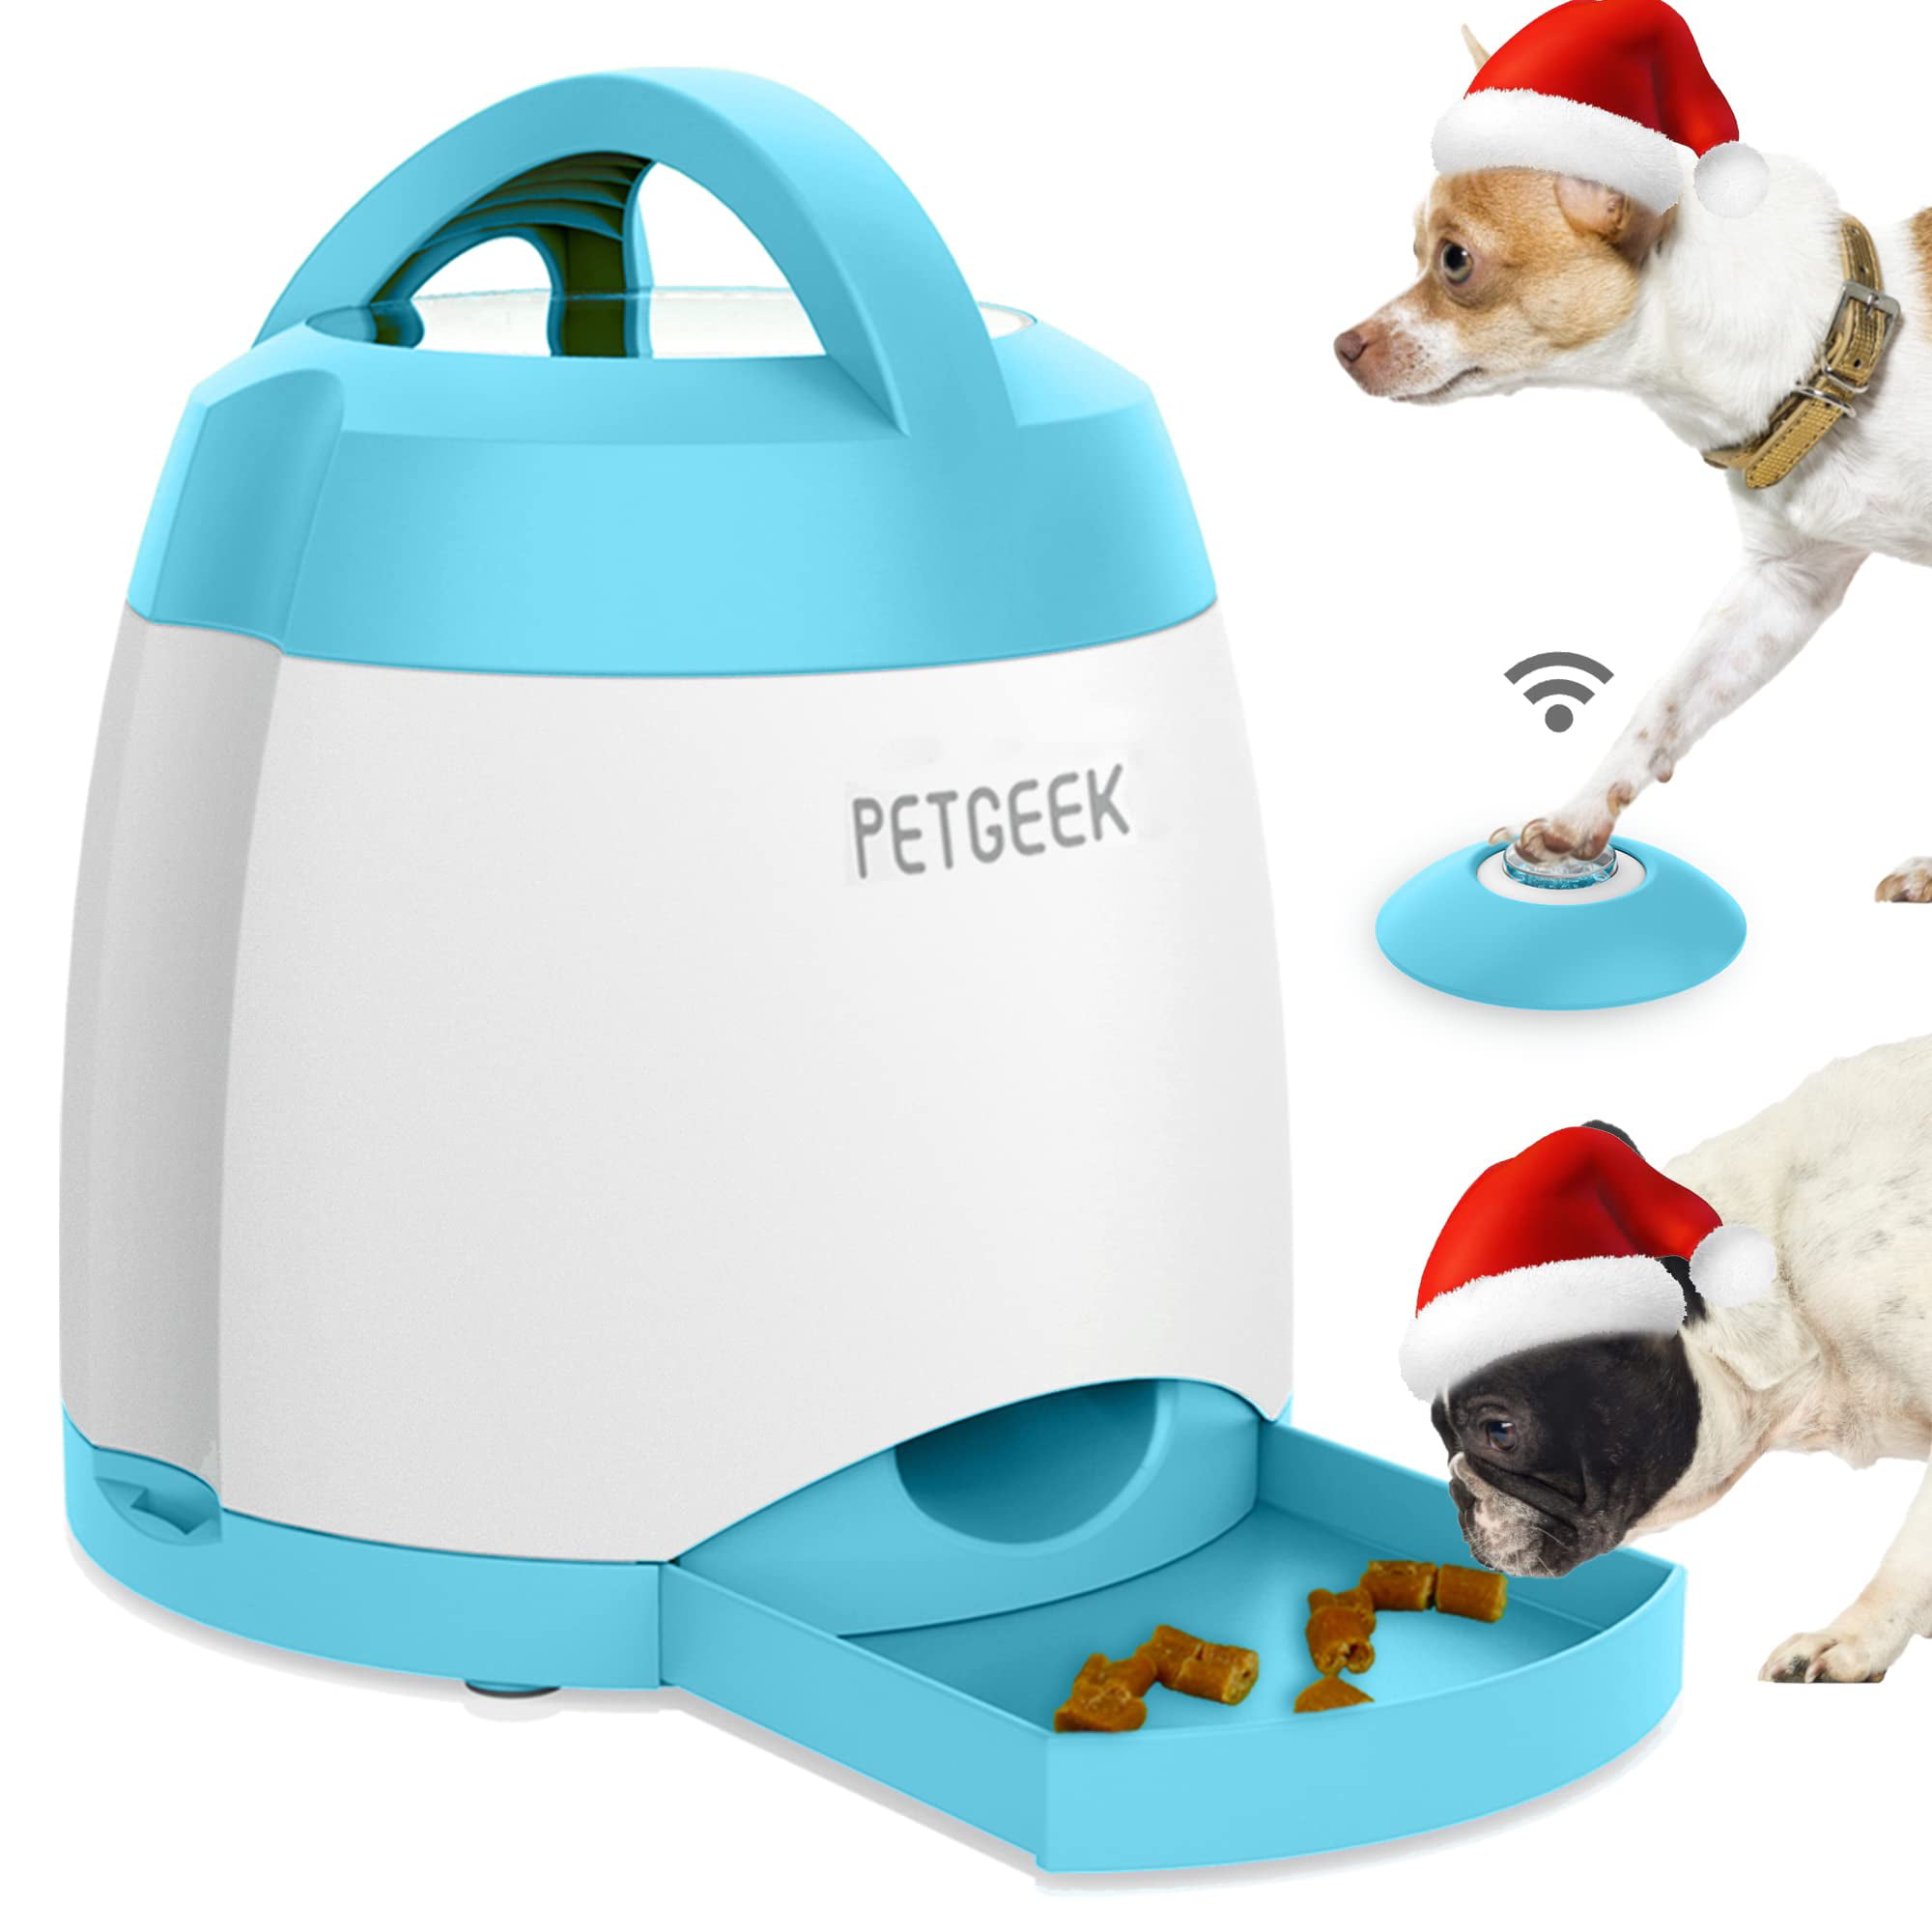 TEOZZO Dog Toy Cat Smart IQ Toy Puppy Treat Dispenser Interactive Pet Toys  - Specially Designed for Training Treats 